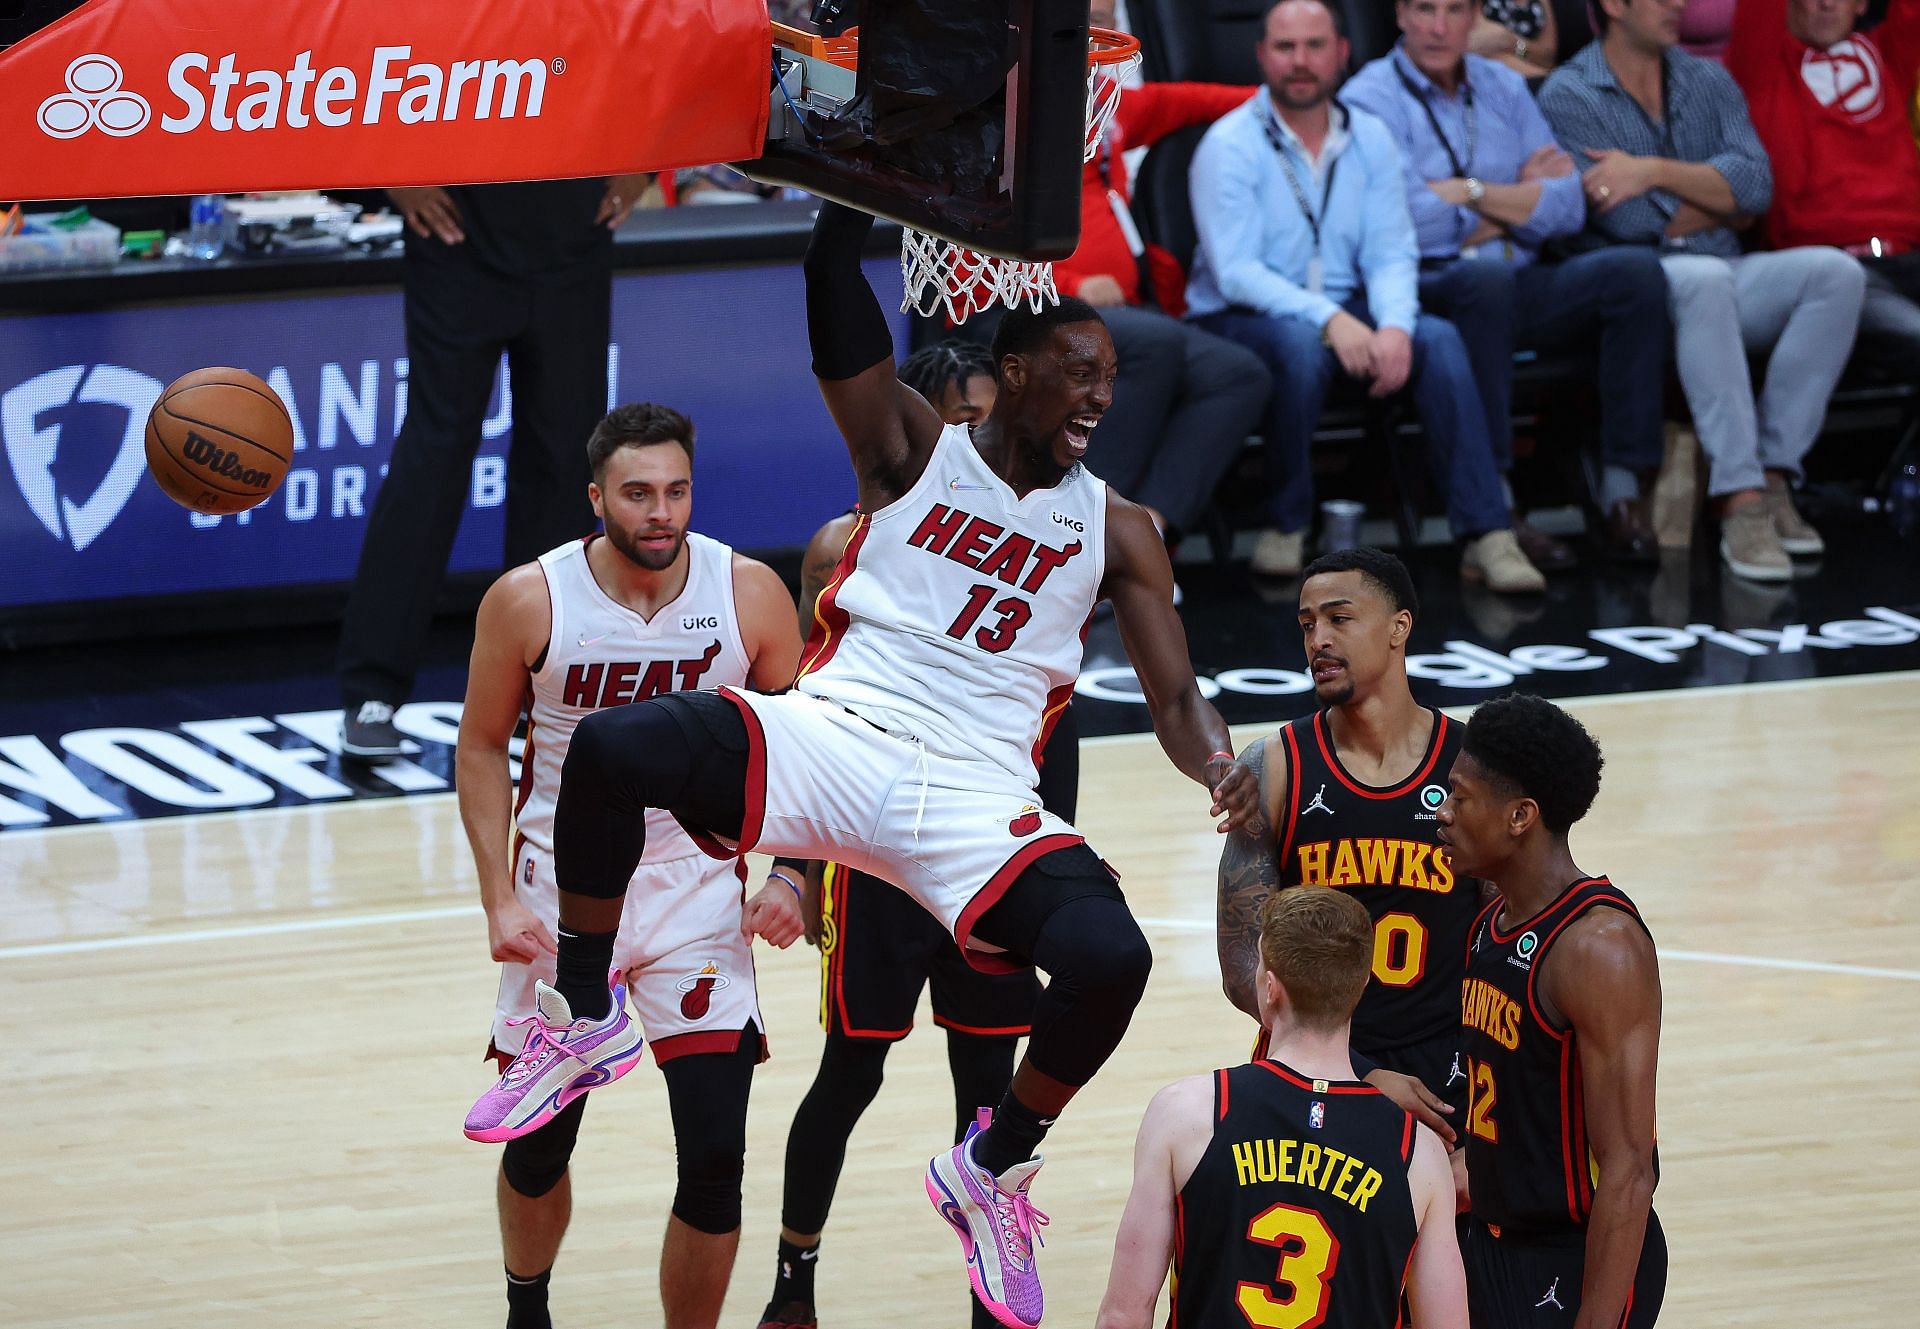 The Miami Heat will host the Atlanta Hawks for Game 5 on April 26th